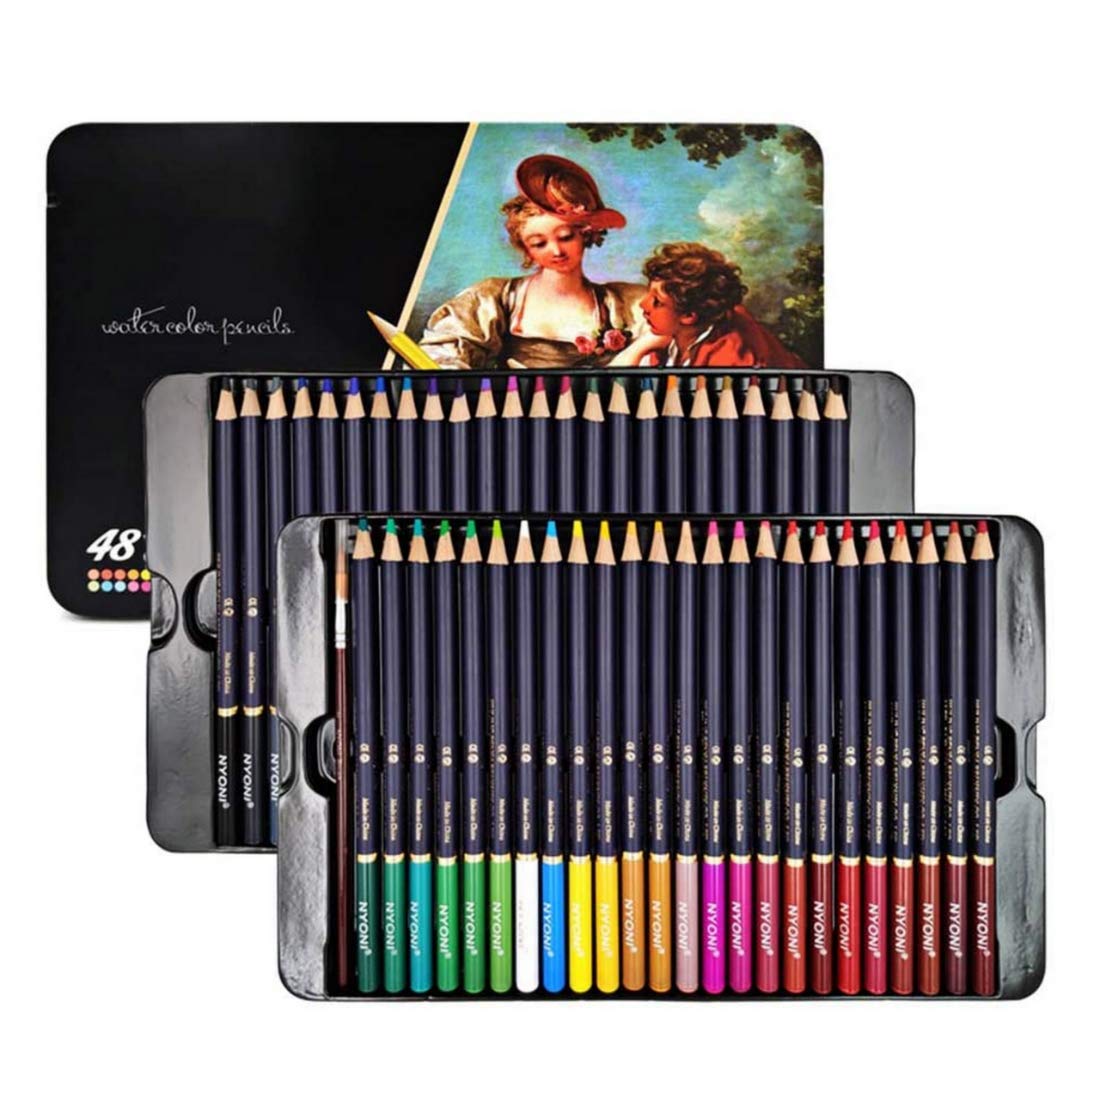 Ondesk Artics Artists' Fine Art Watercolour Pencil Set Tin Box of 48 Assorted Shades | Perfect For Artists', Professionals & Students| Ideal For Sketching, Painting, Drawing, Shading & Illustrations